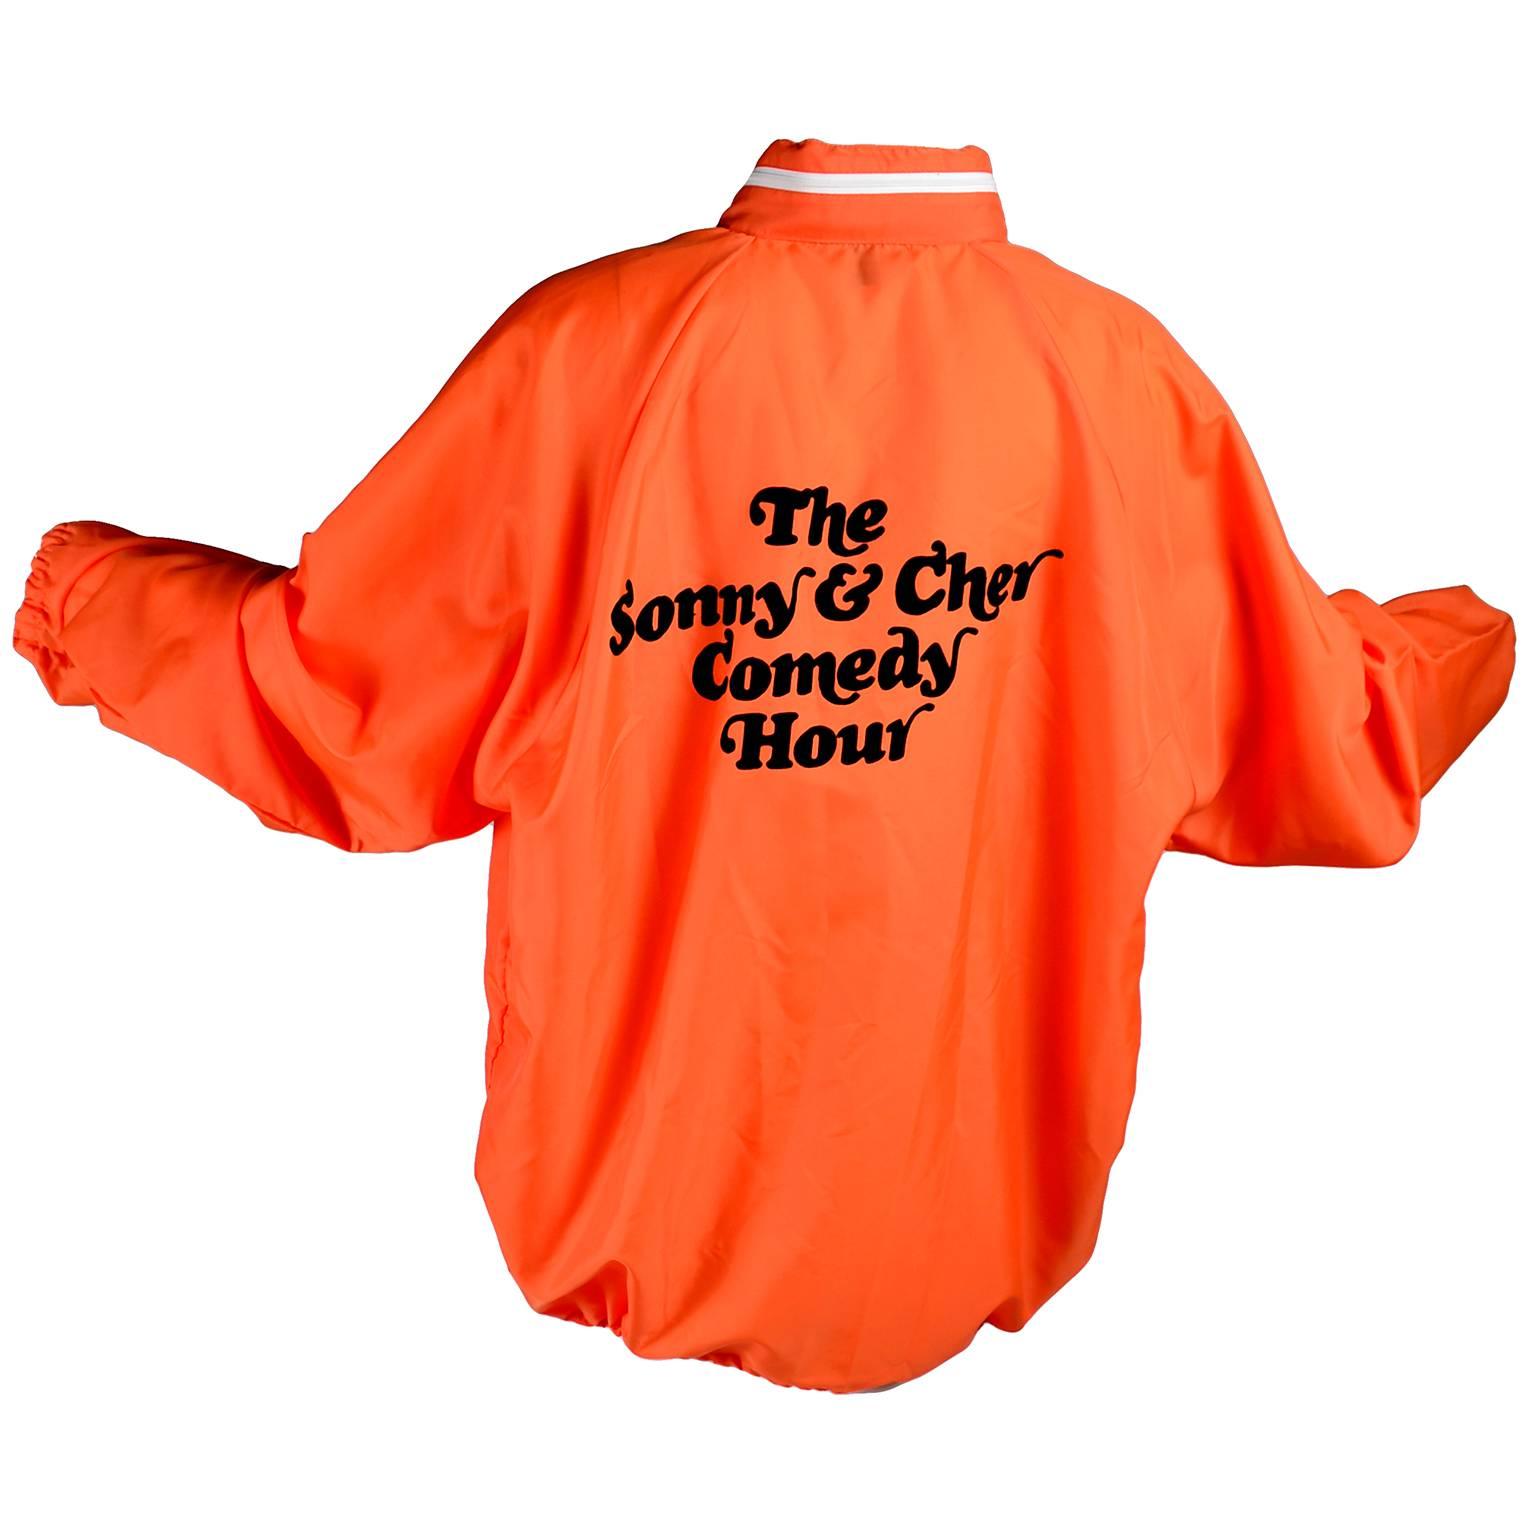 This orange nylon jacket is an original crew jacket from the Sonny & Cher Comedy Hour television show in the 1970's.  This Sonny and Cher Comedy Hour jacket is from 1971 and came from a collector who owned many Cher related items, including several